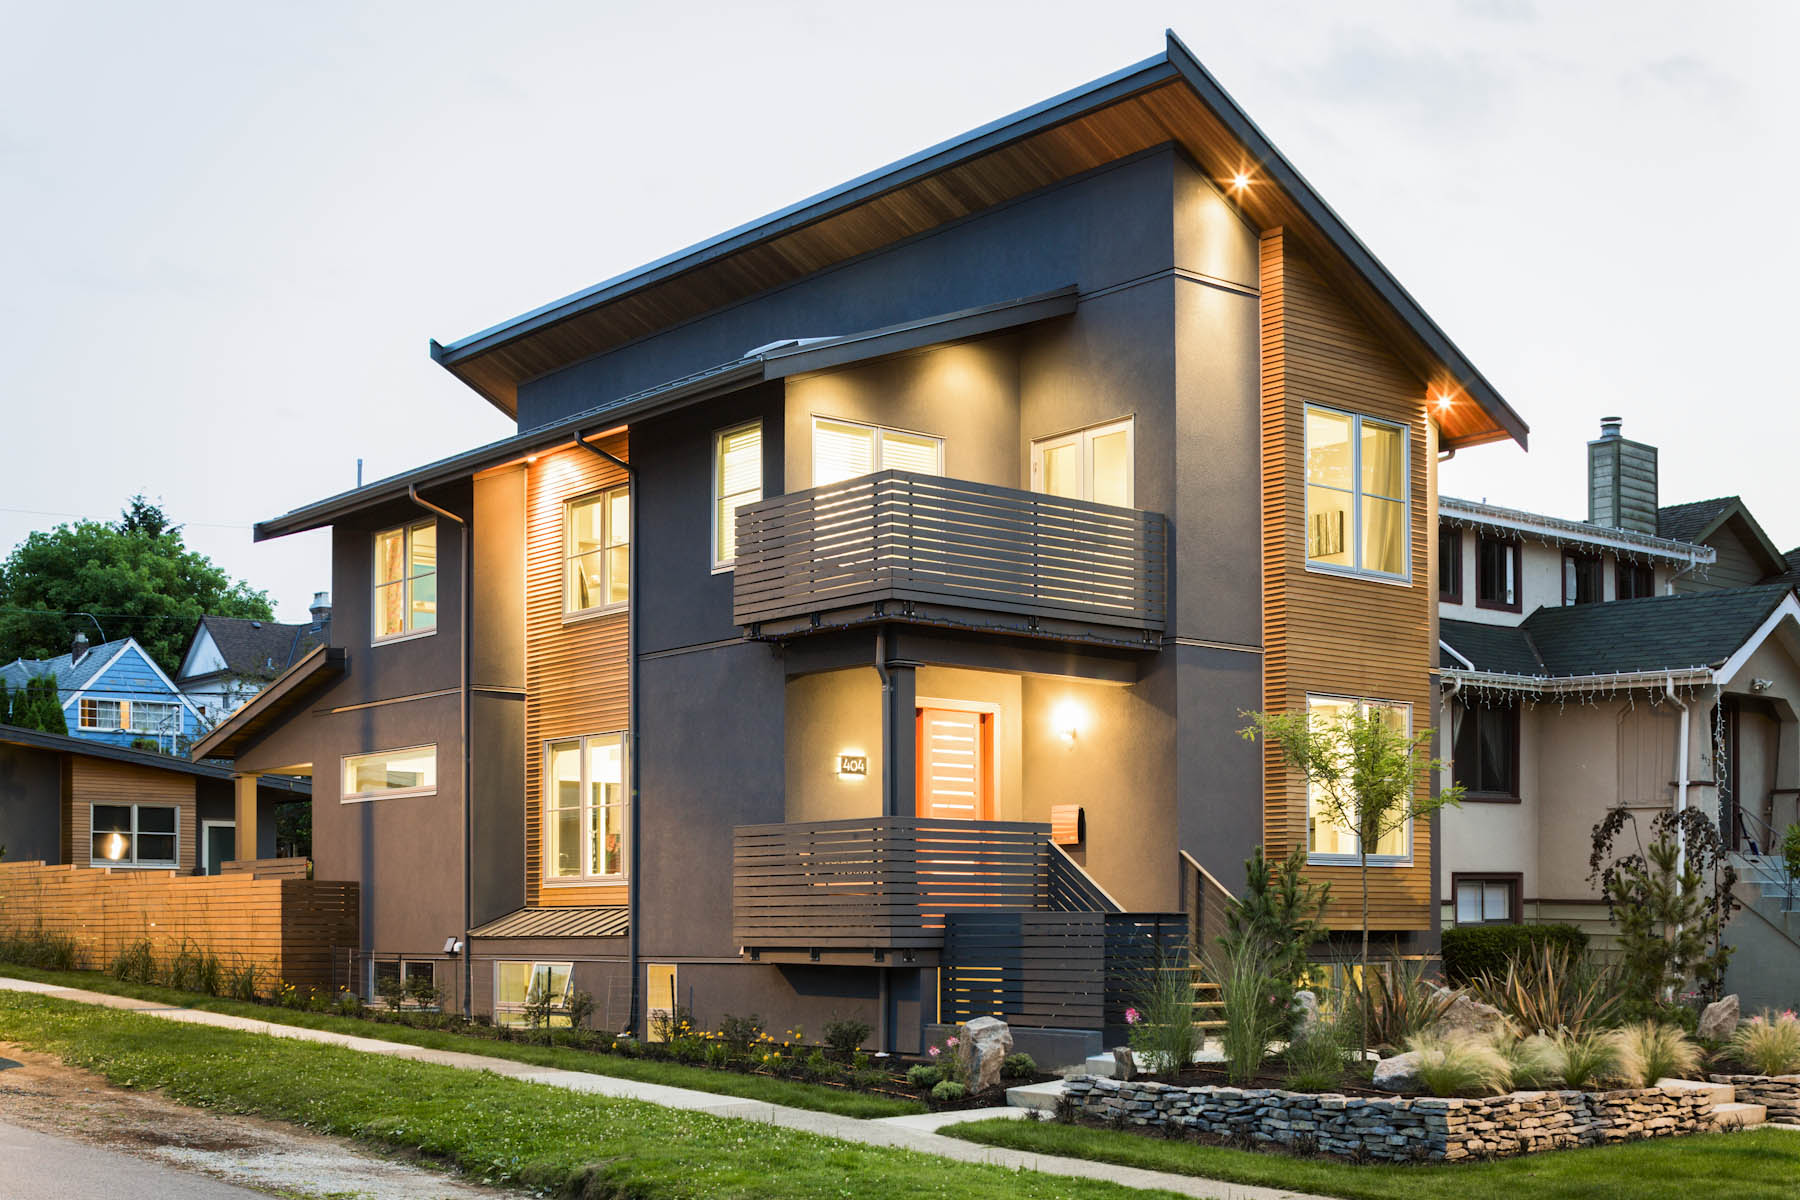 Front view of the modern home design at the West Vancouver custom home.